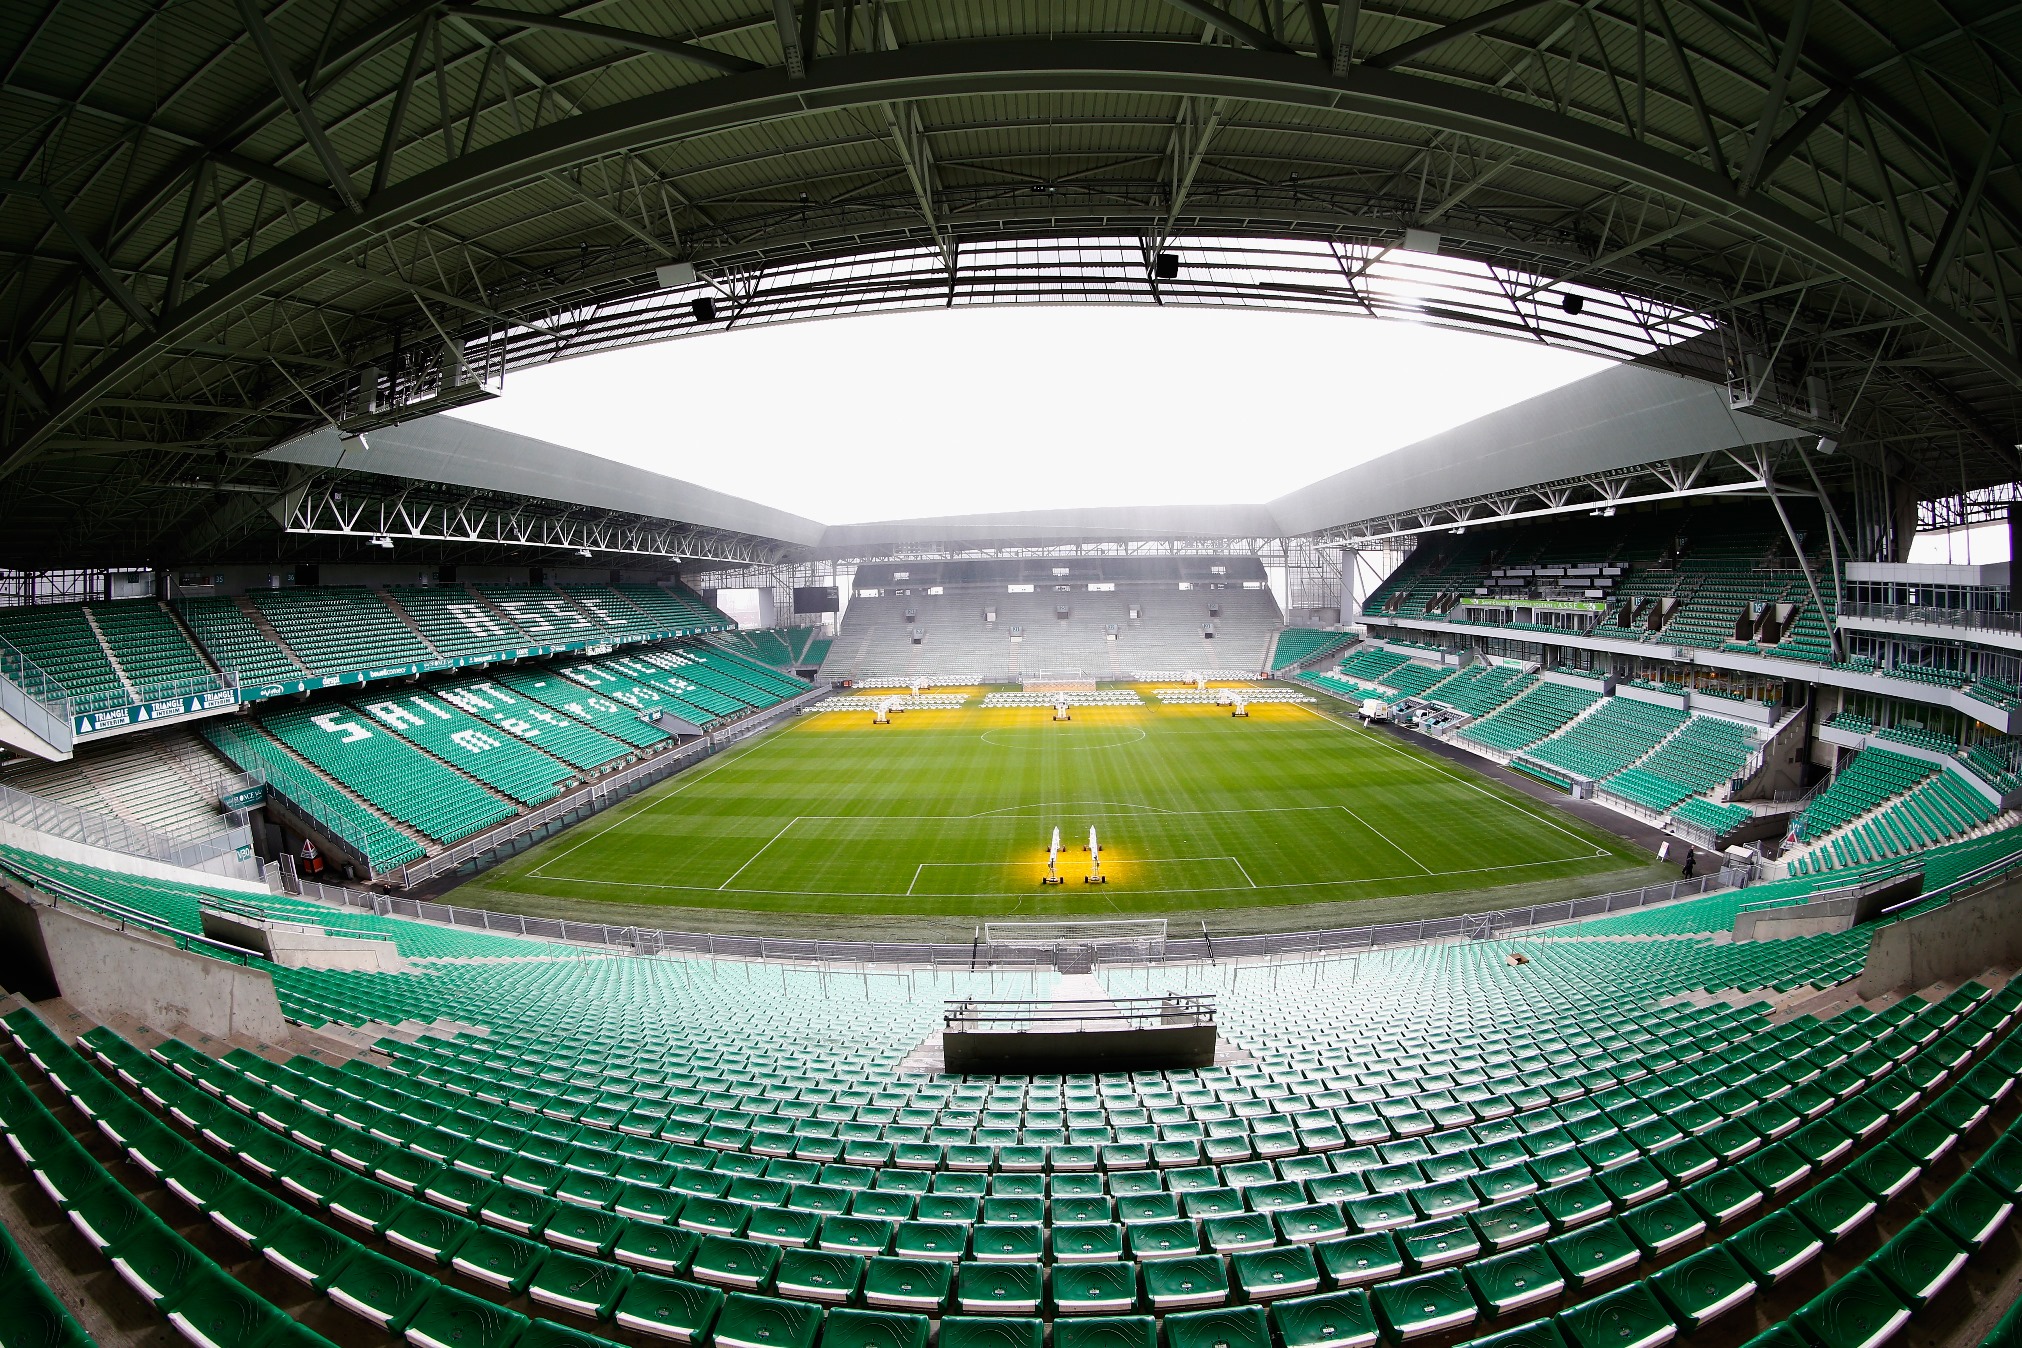 St Etienne VS Montpellier ( BETTING TIPS, Match Preview & Expert Analysis )